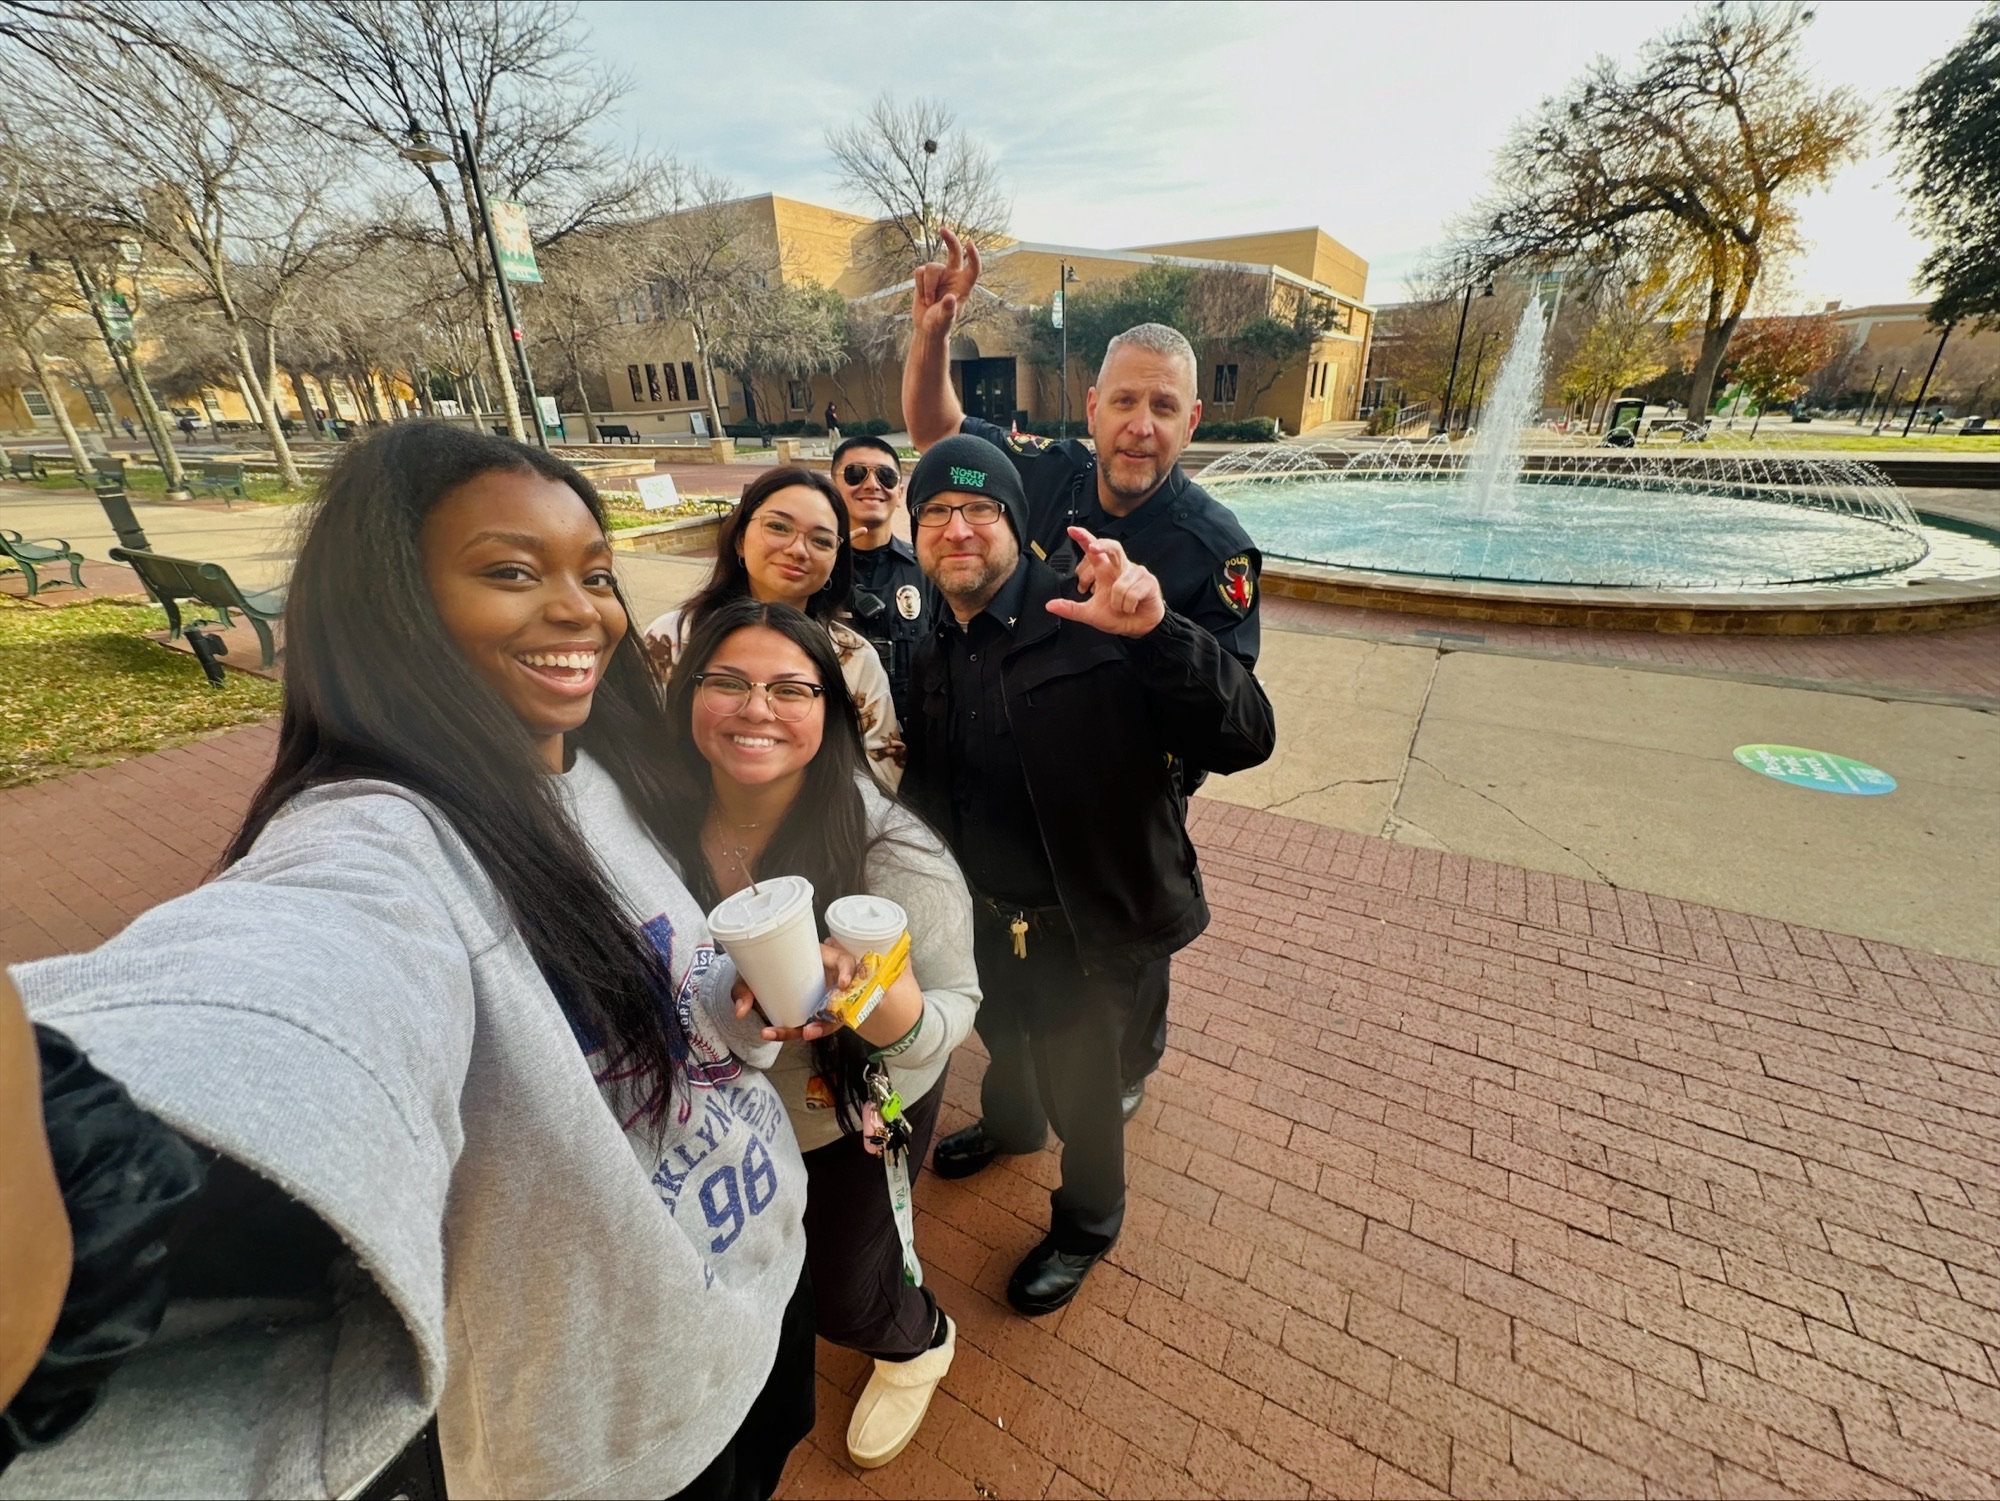 Selfie-style photo with students and two police officers lined up outside of UNT's Willis Library